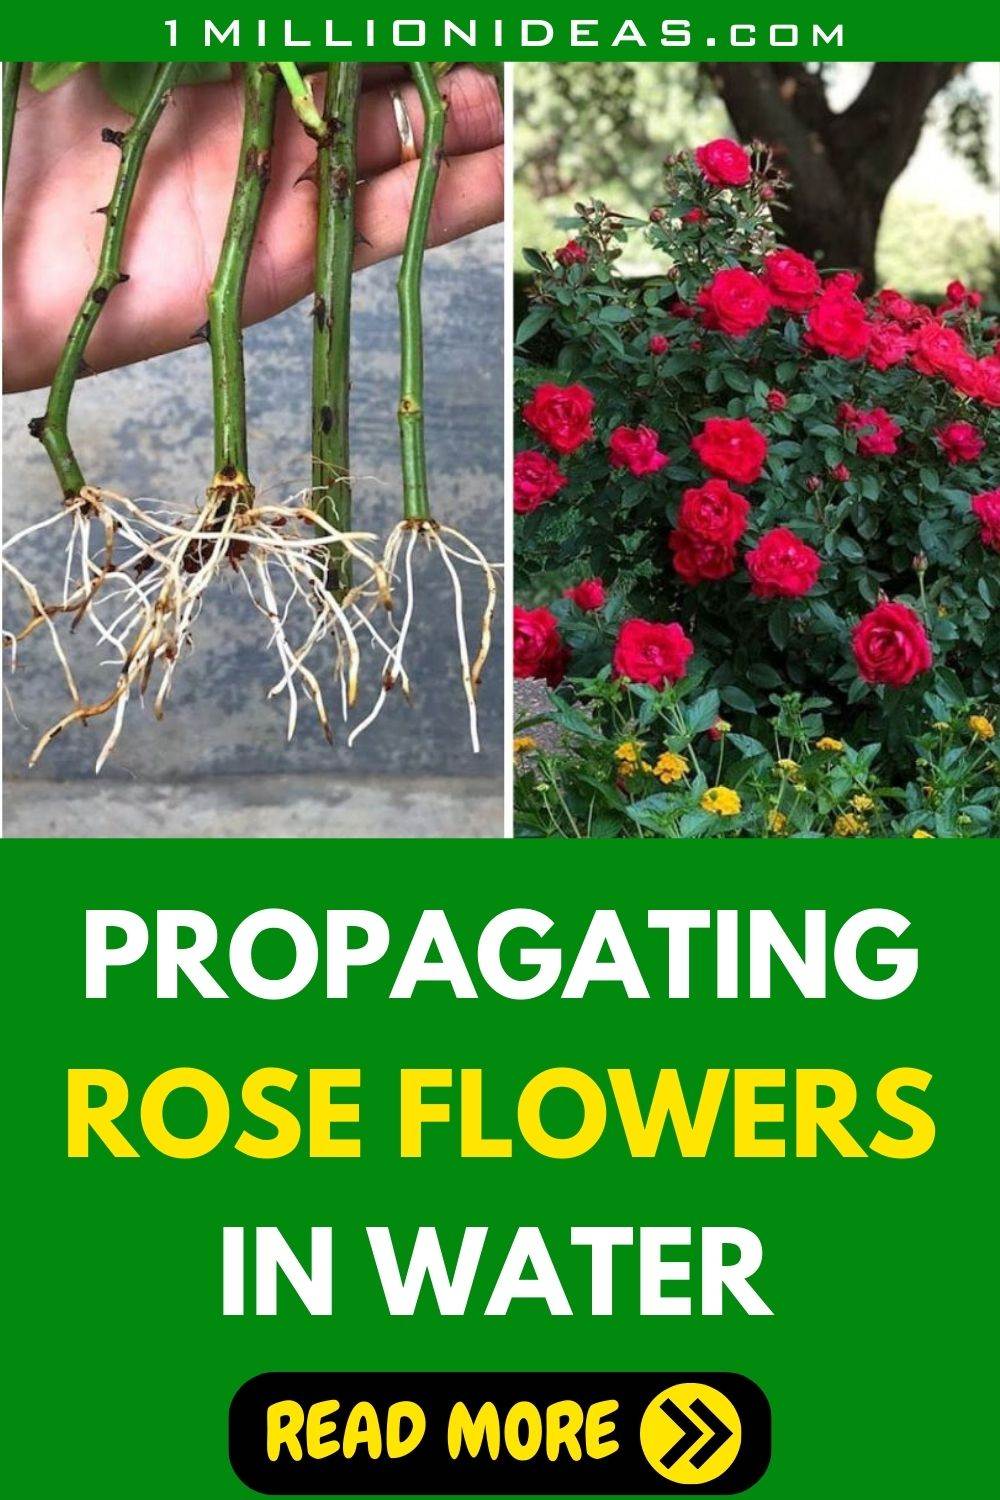 Propagating Roses In A Water Glass To Save Money And Enjoy More Flowers - 41